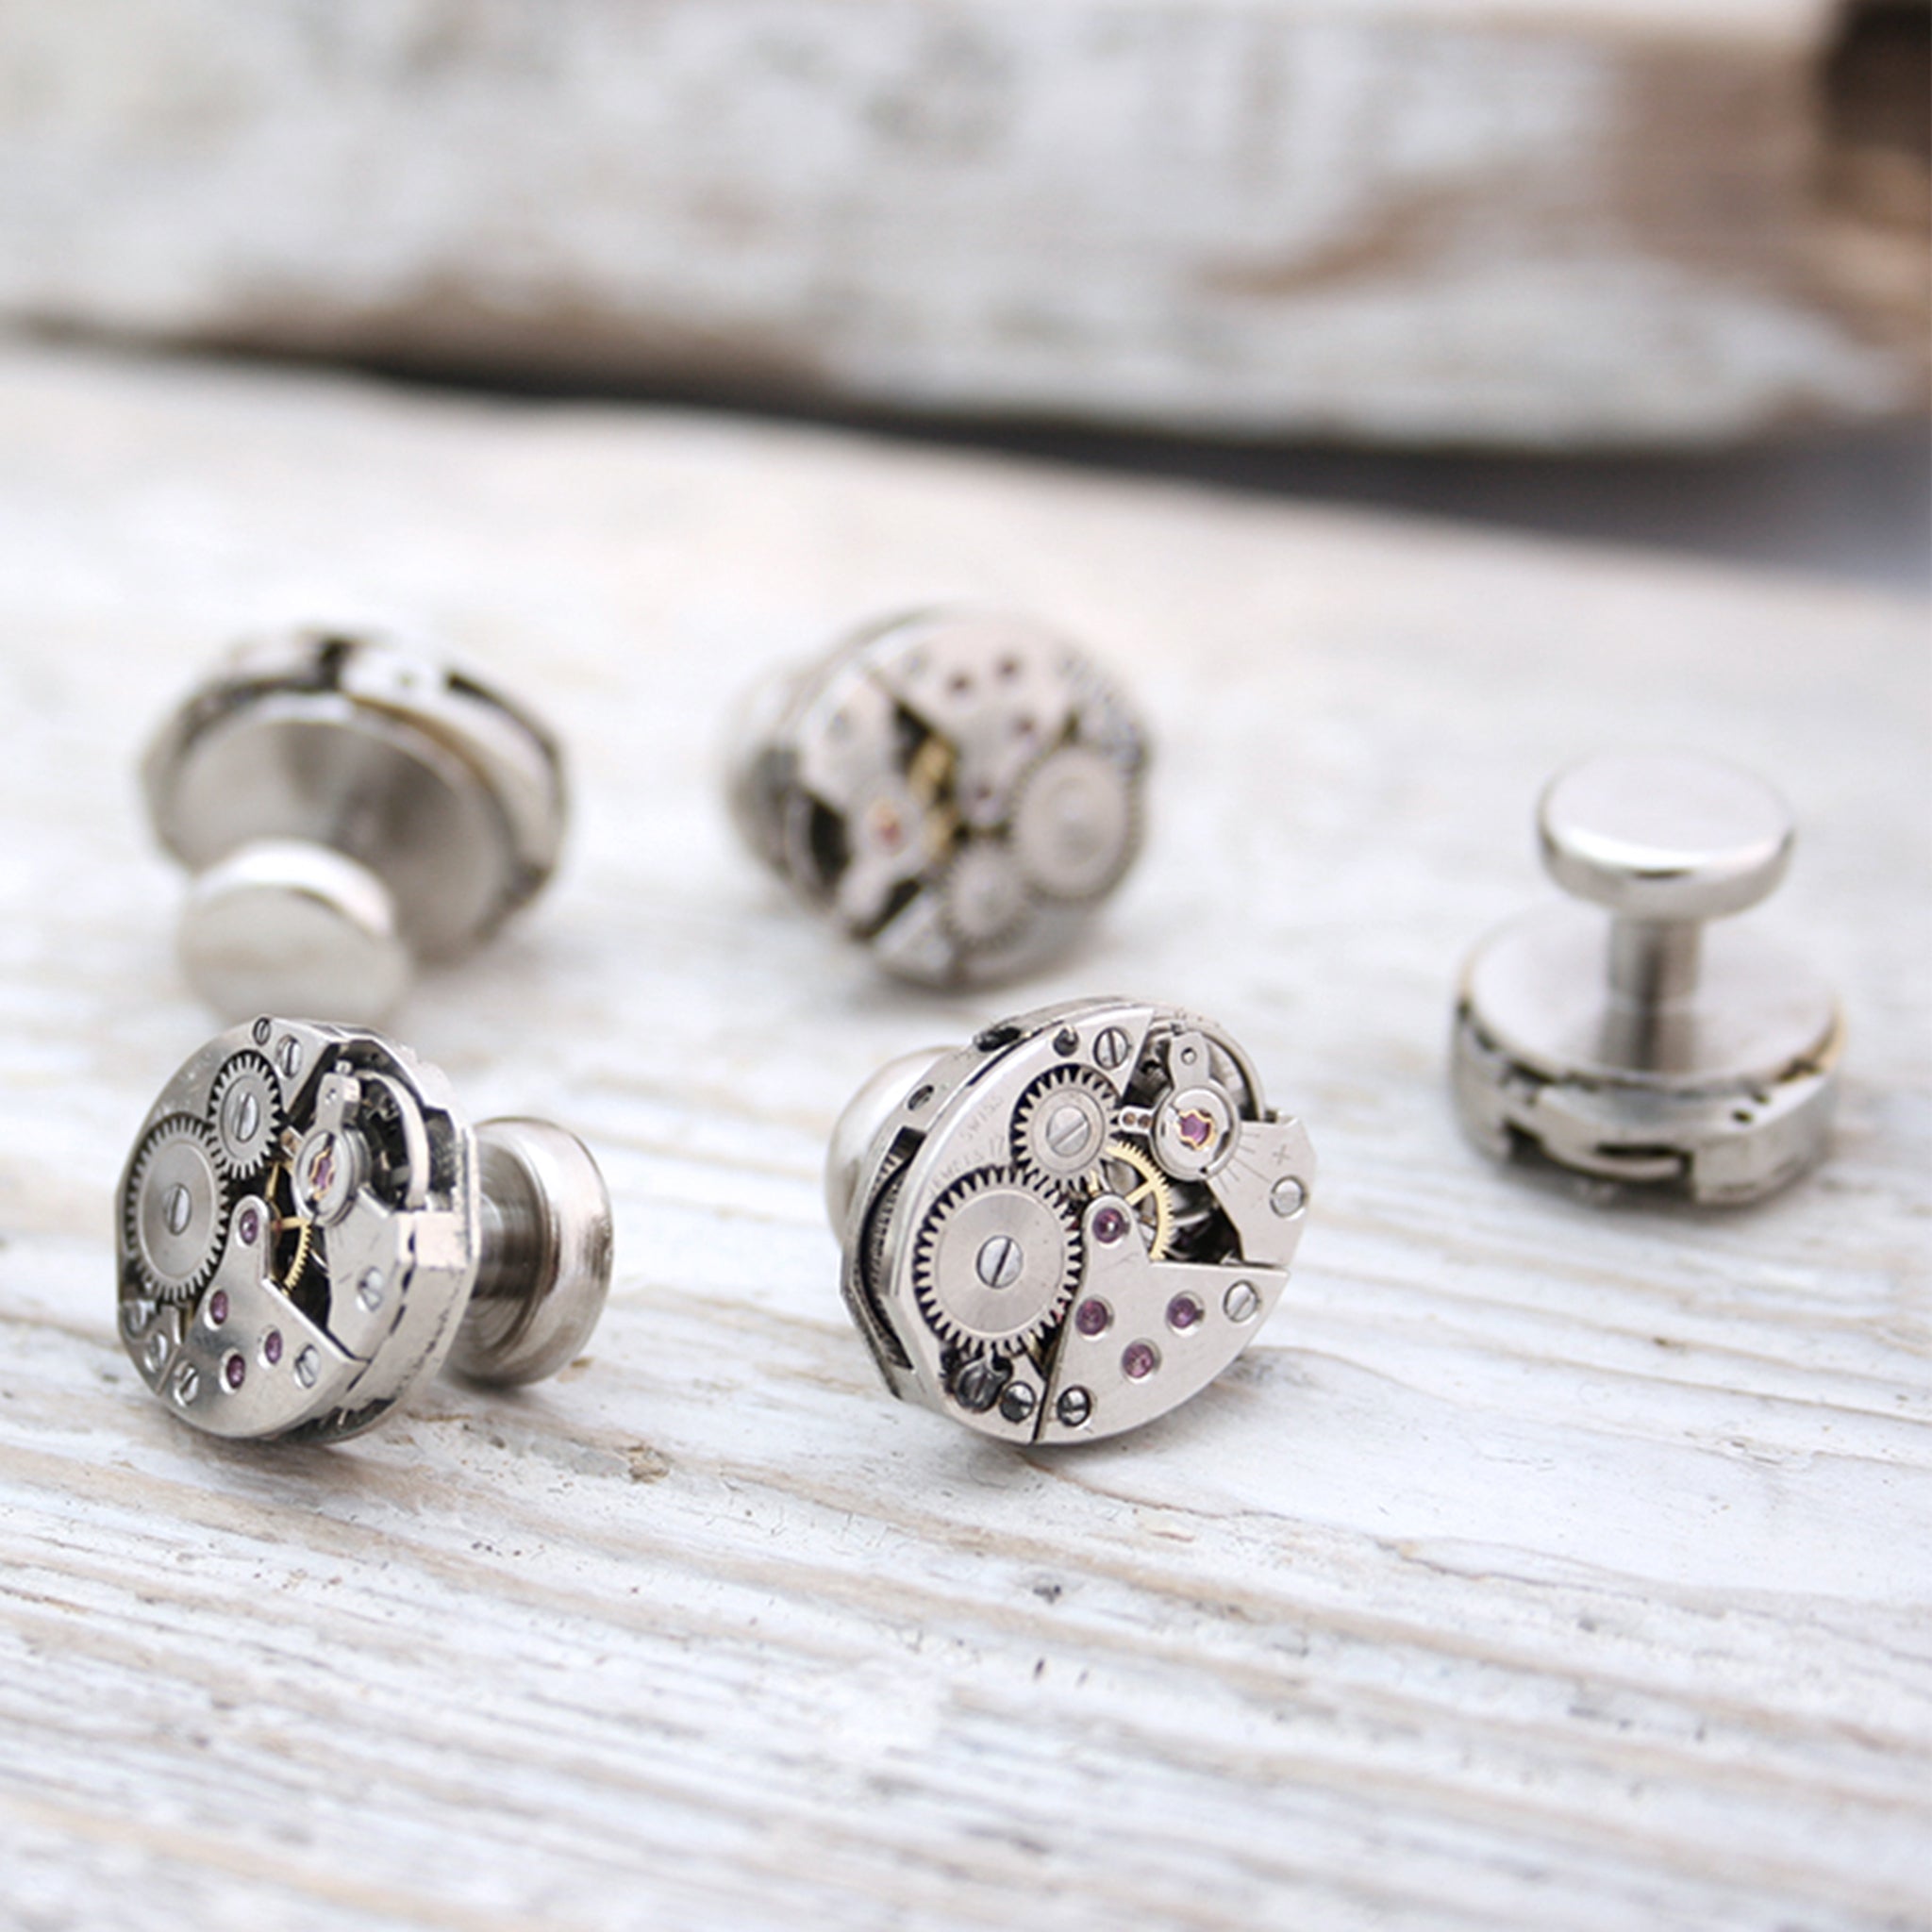 Set of four tuxedo studs made of real watch mechanisms